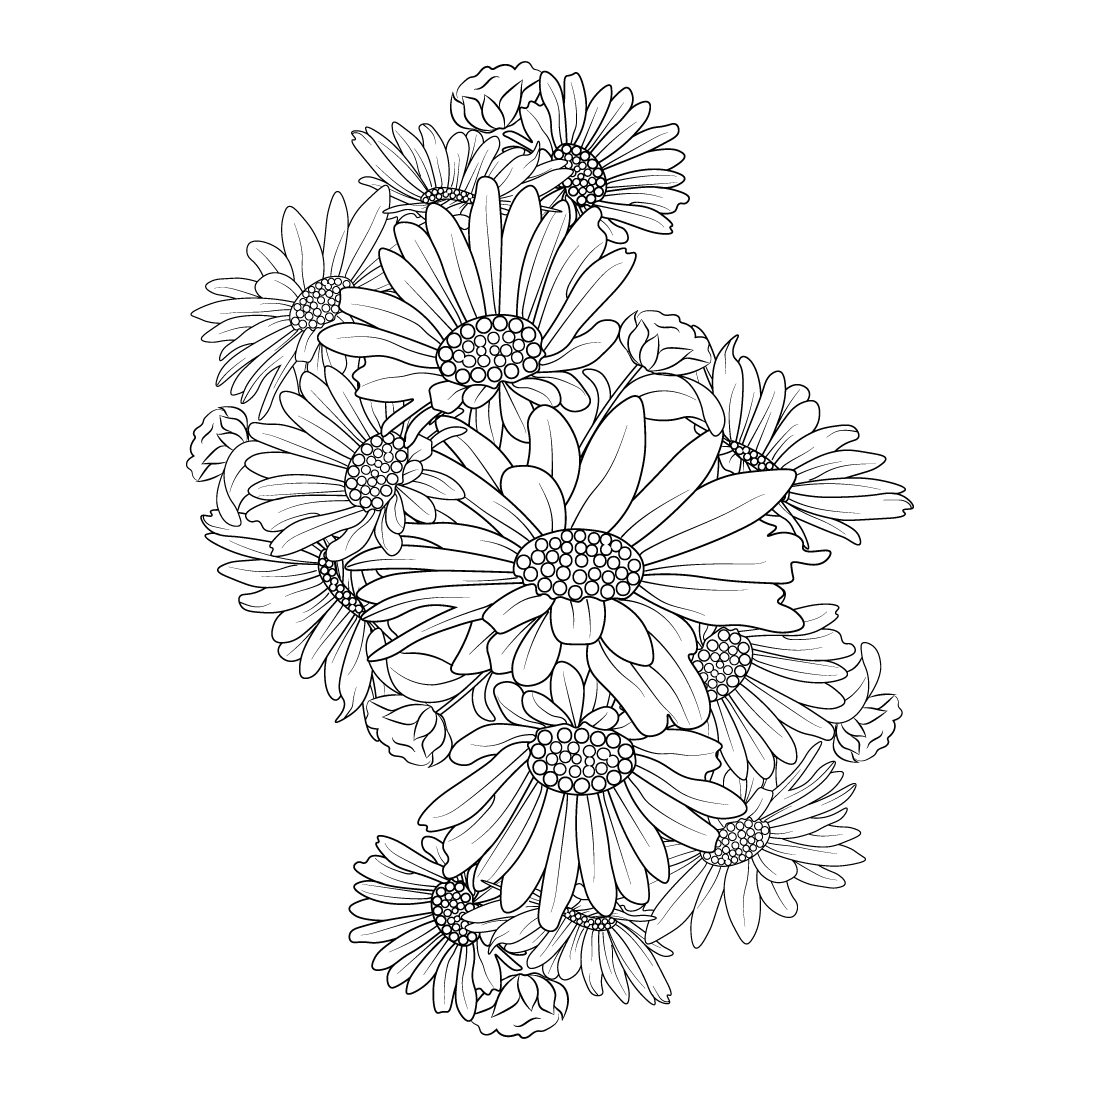 zentangle tattoo design with daisy flowers, relaxation flower coloring pages for adults, preview image.